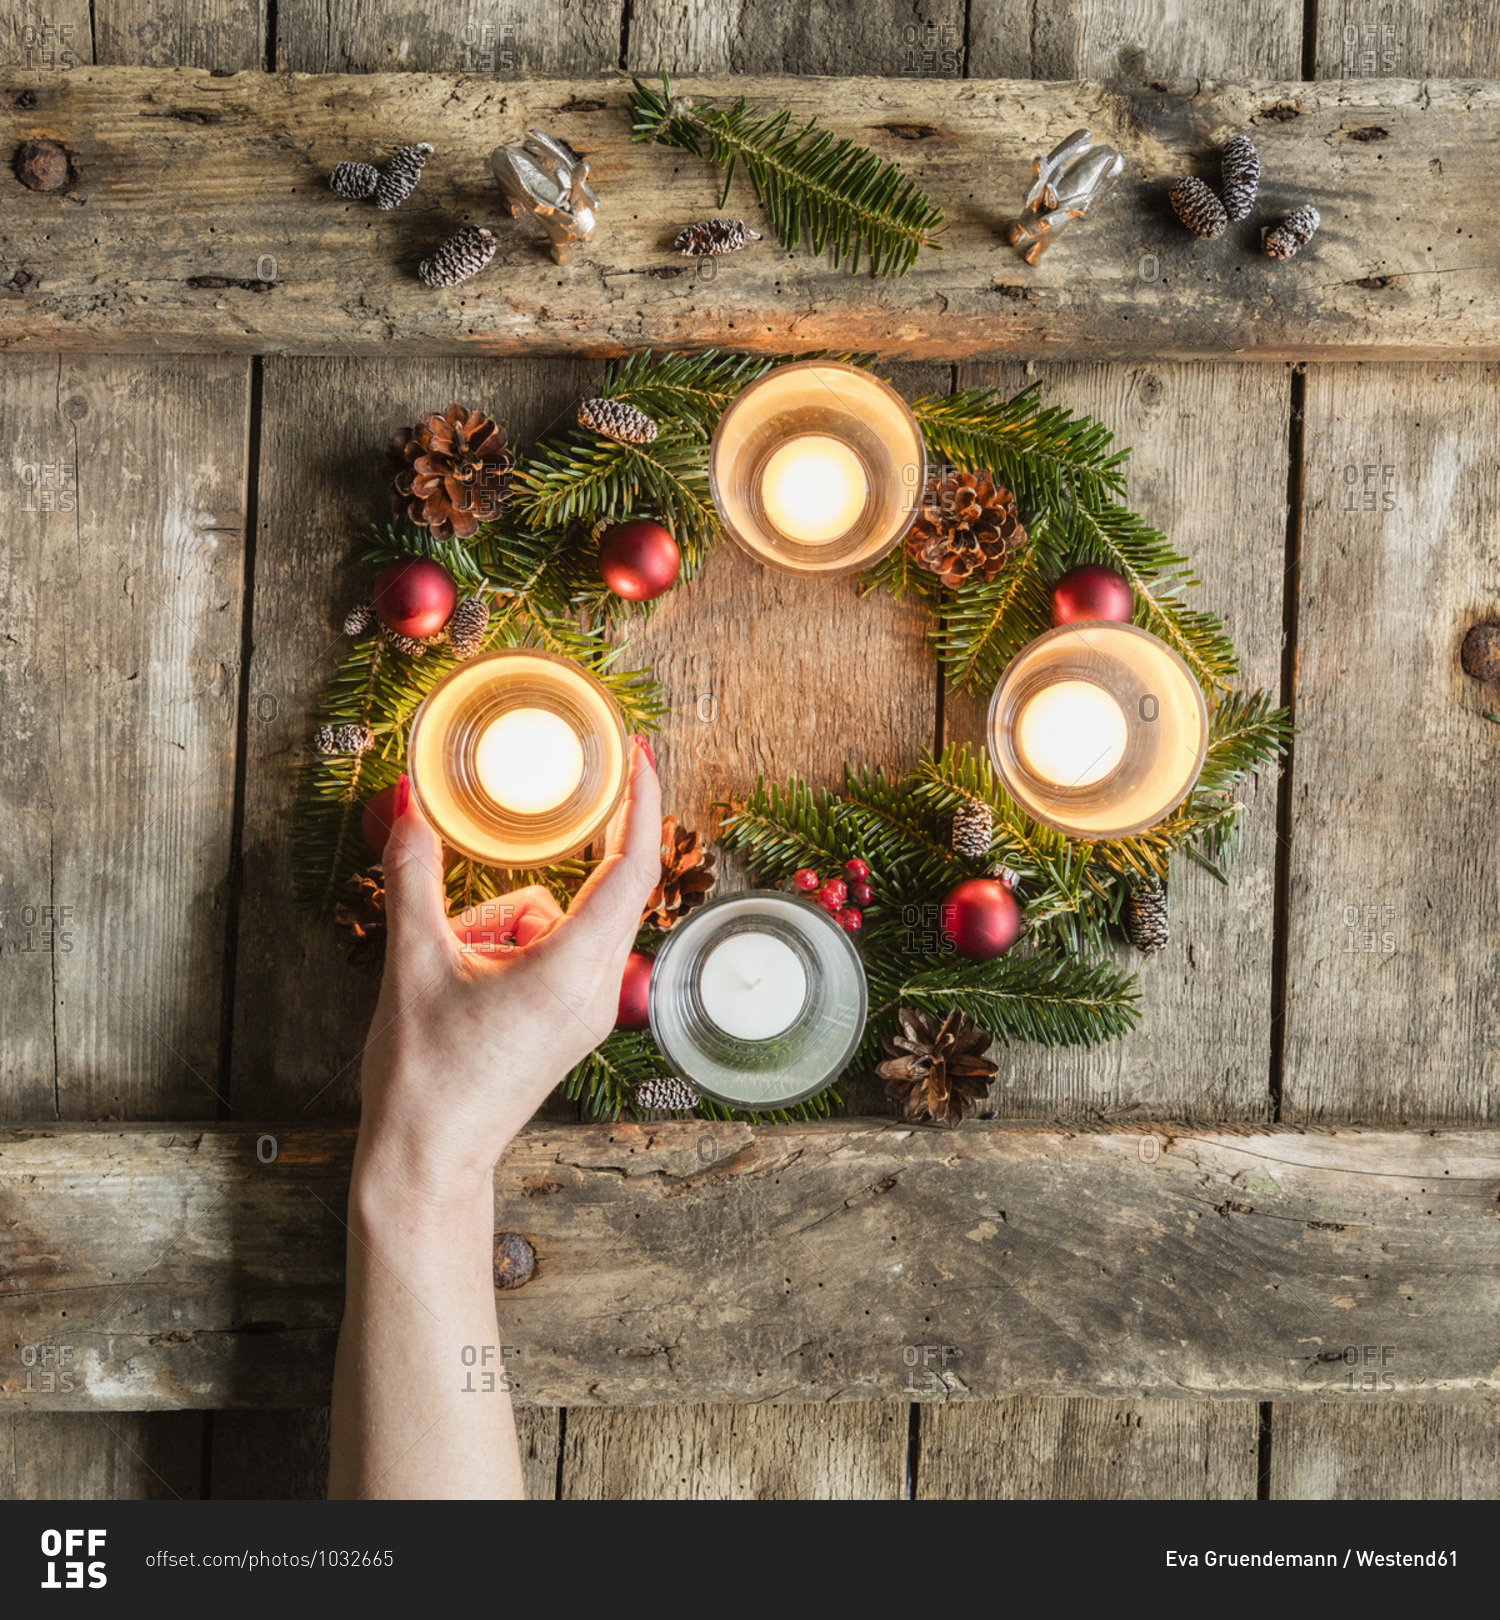 Hand of woman touching glass cover of candle burning on Advent wreath